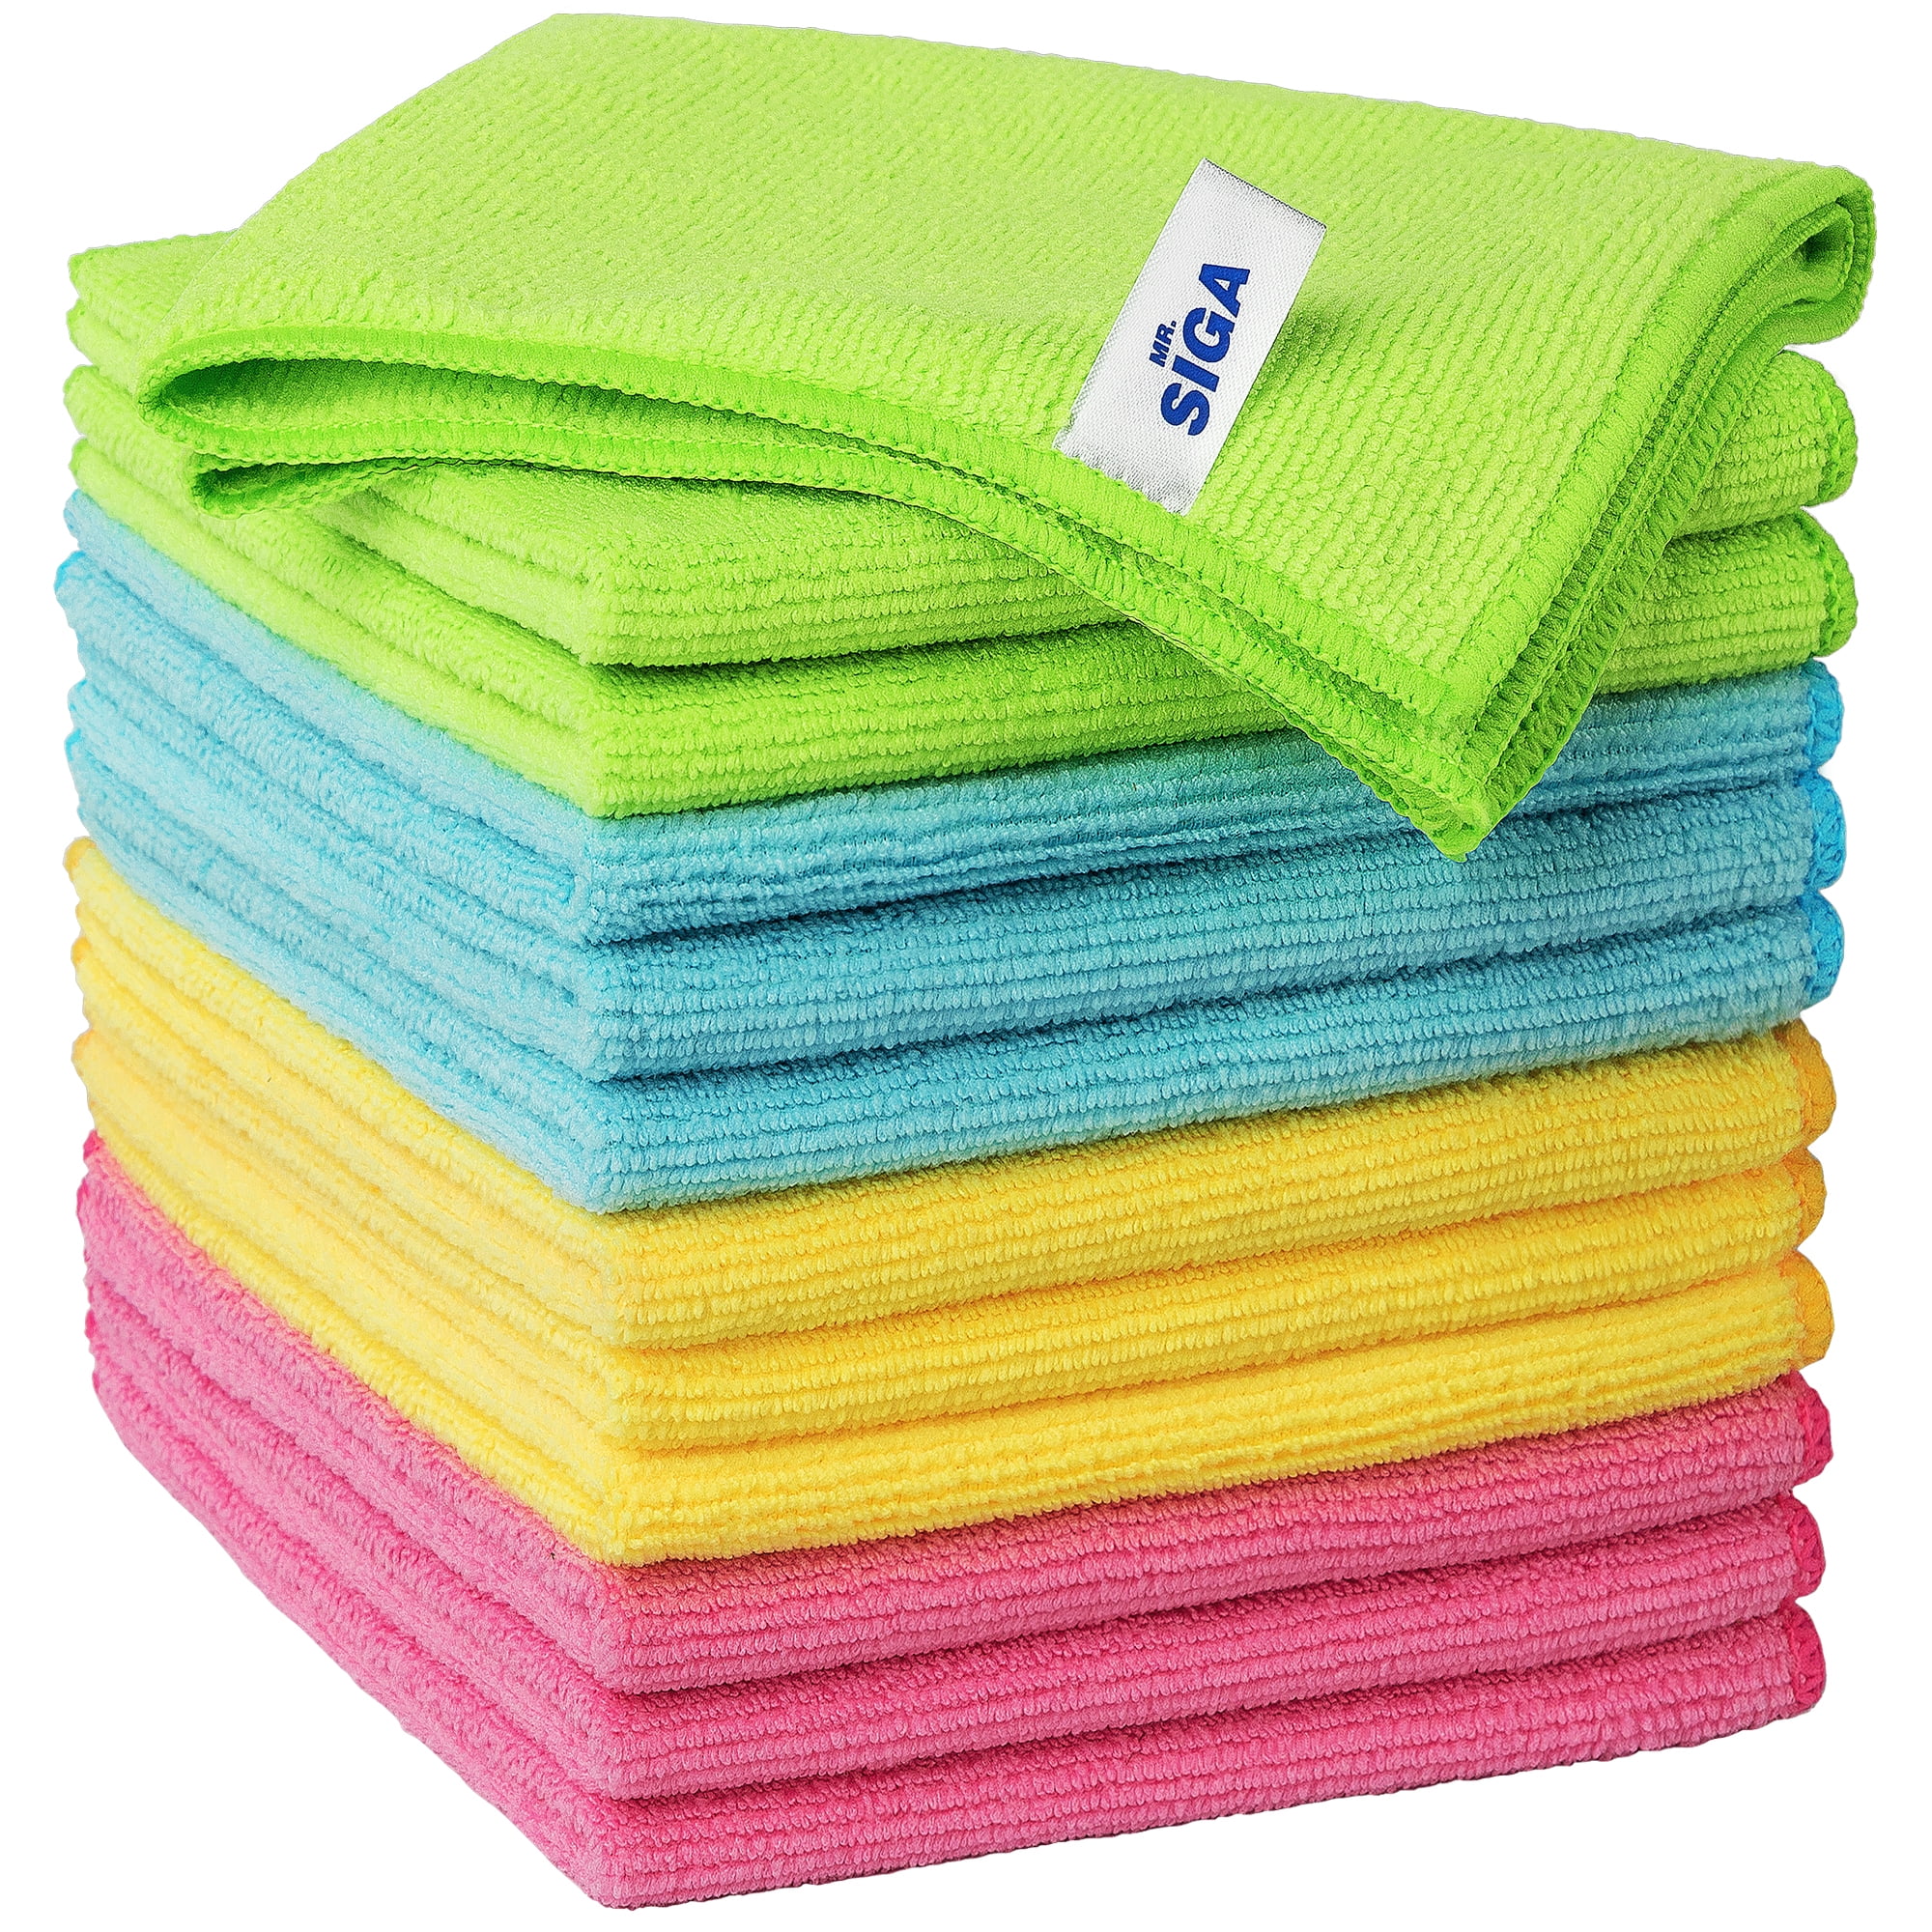 MR.SIGA Microfiber Cleaning Cloth for Kitchen, Household & Car Cleaning, Pack of 12, Size: 12.6" x 12.6" - image 1 of 9